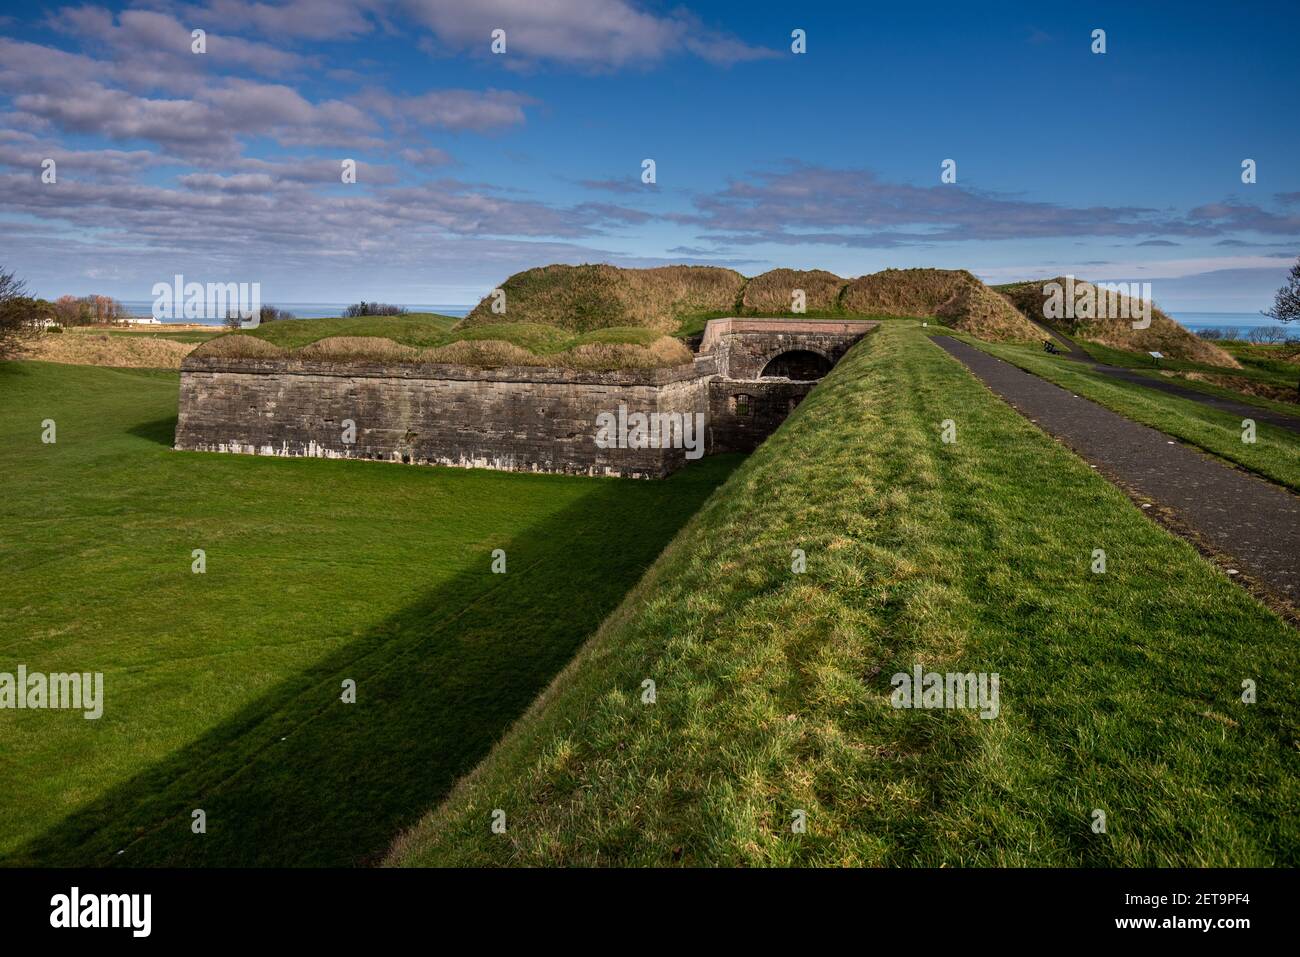 The Elizabethan town walls that surround Englands most northerly town, Berwick upon Tweed, Northumberland, England, UK Stock Photo